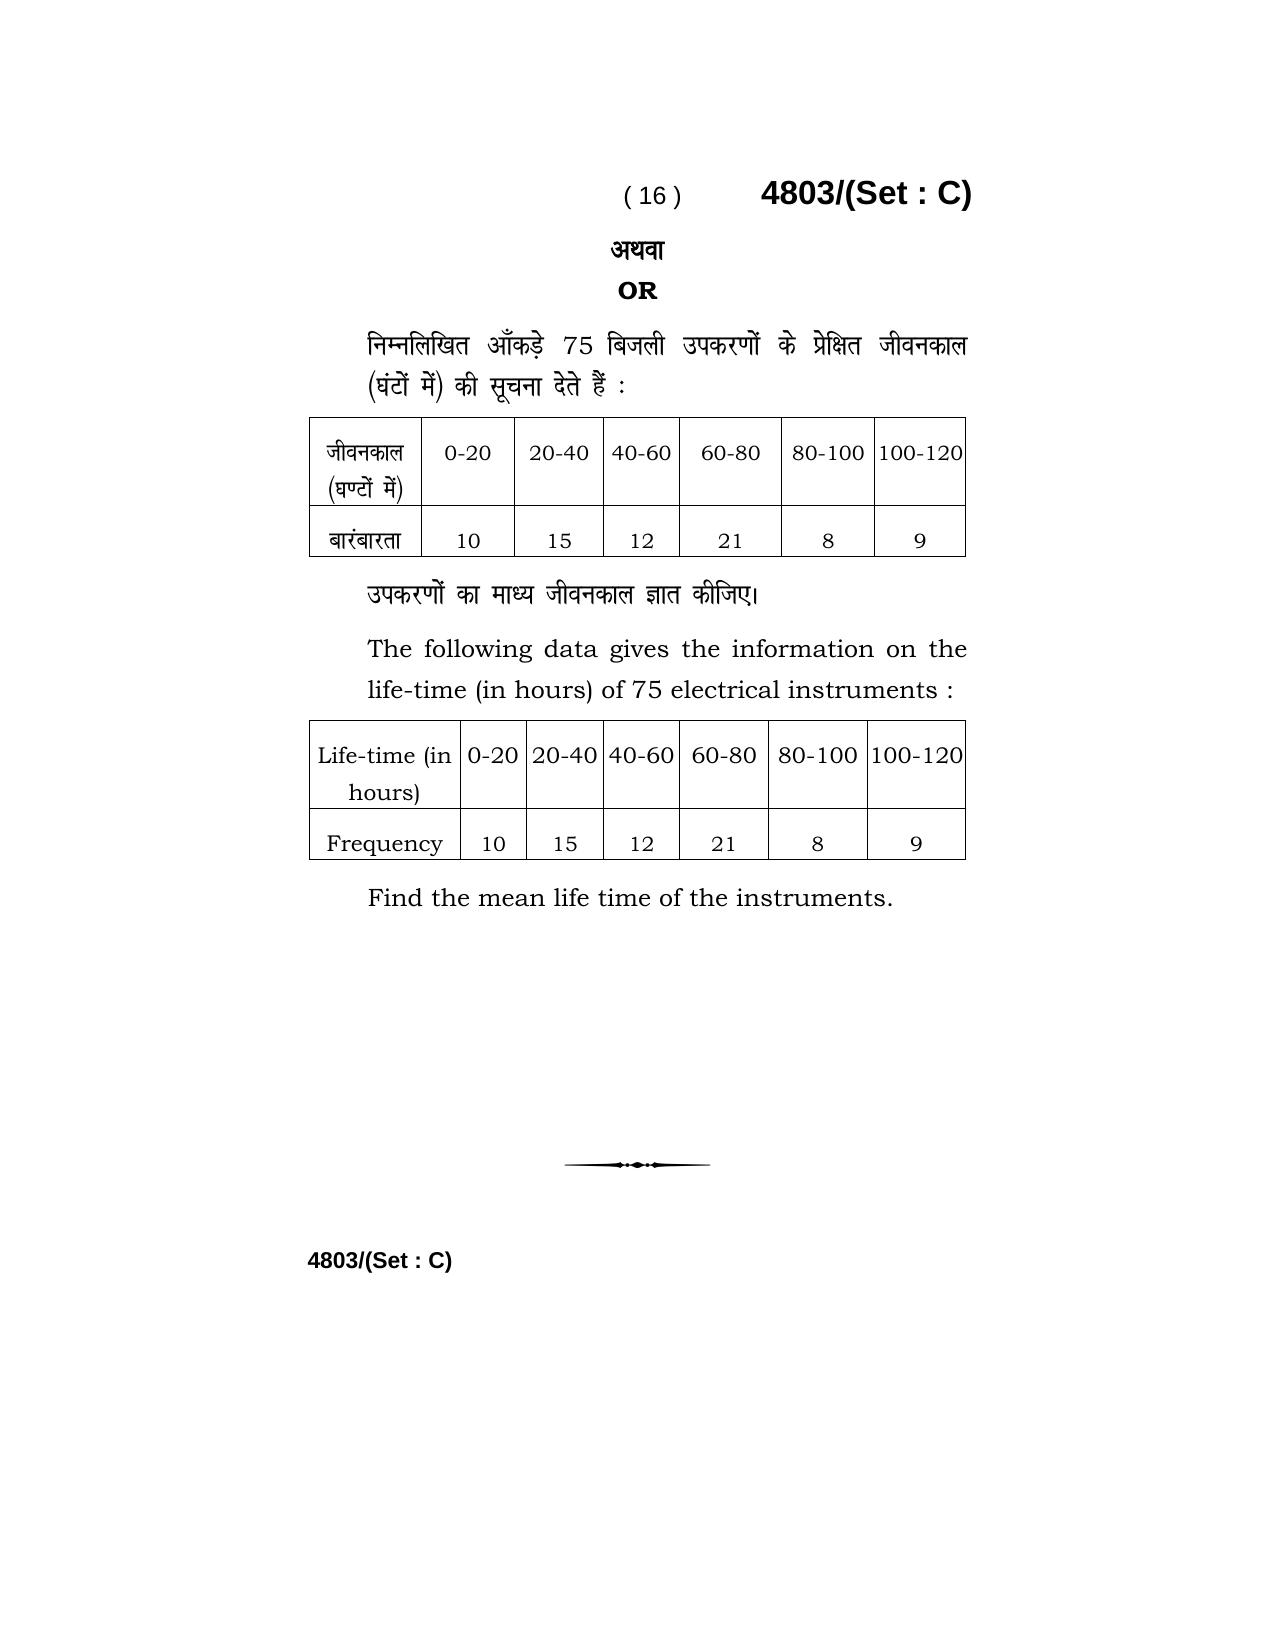 Haryana Board HBSE Class 10 Mathematics 2020 Question Paper - Page 48